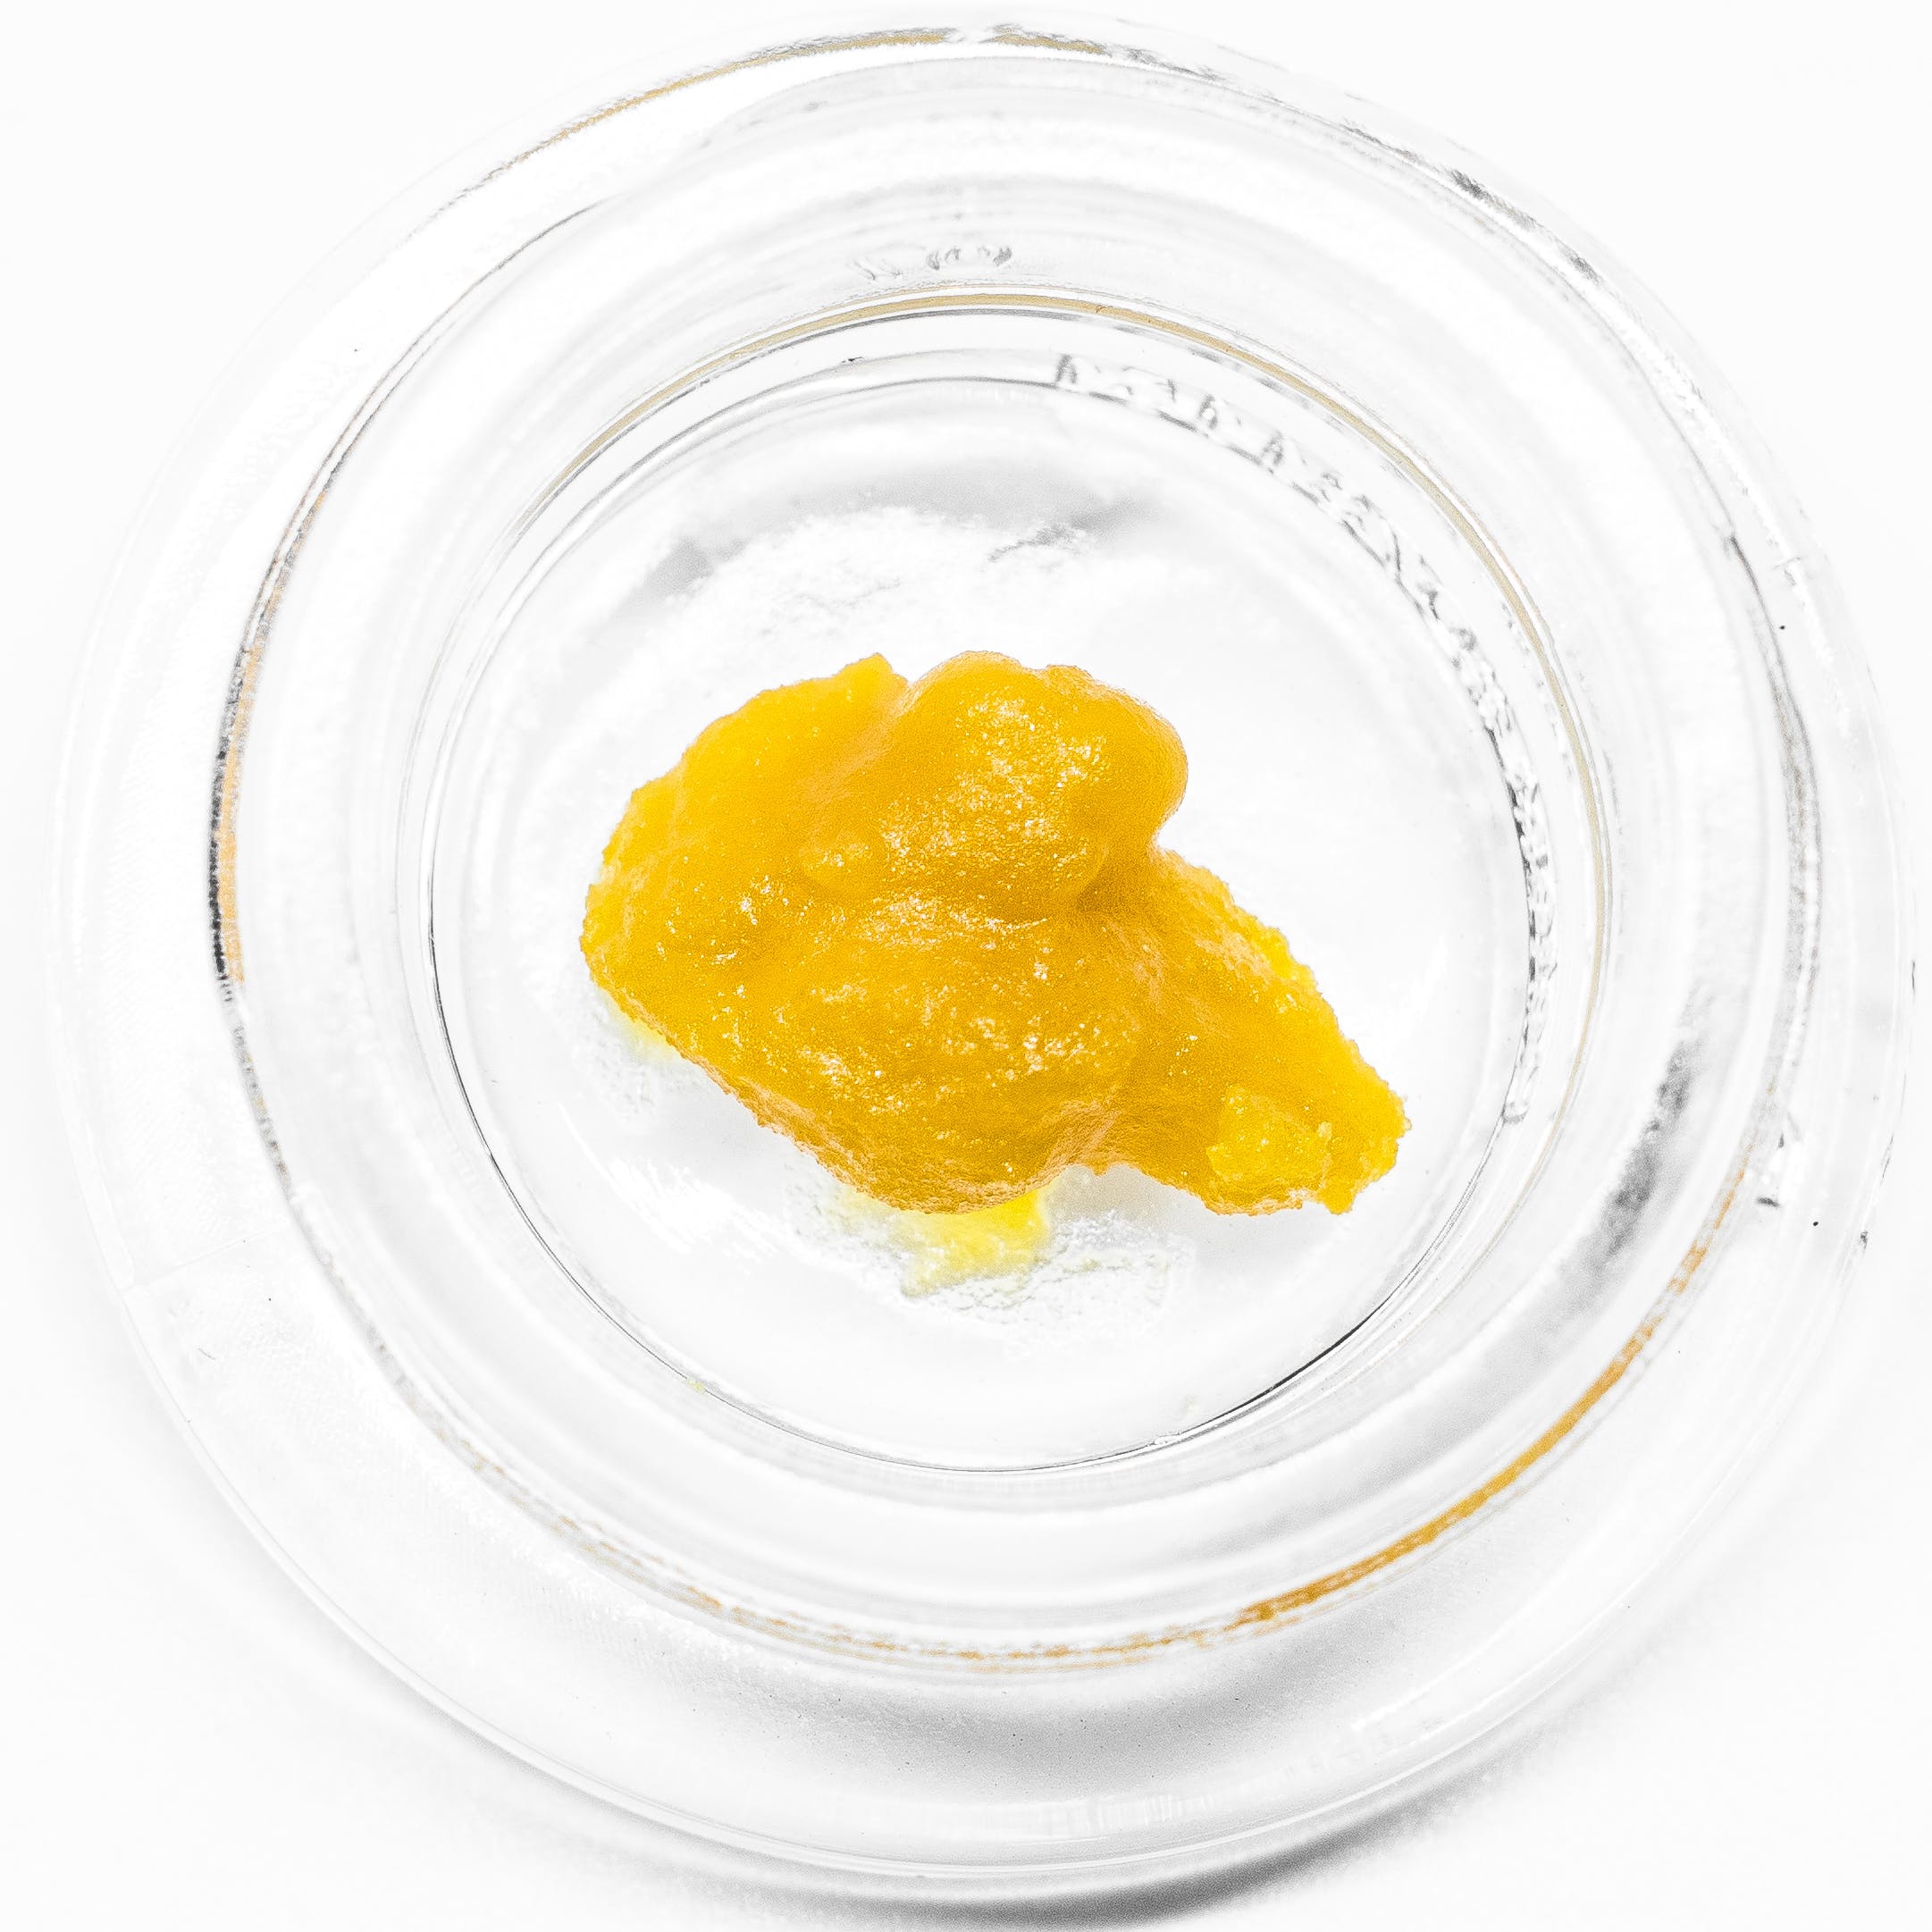 concentrate-2445-summit-killer-queen-live-resin-h-70-53-25-buy-one-2c-get-one-50-25-off